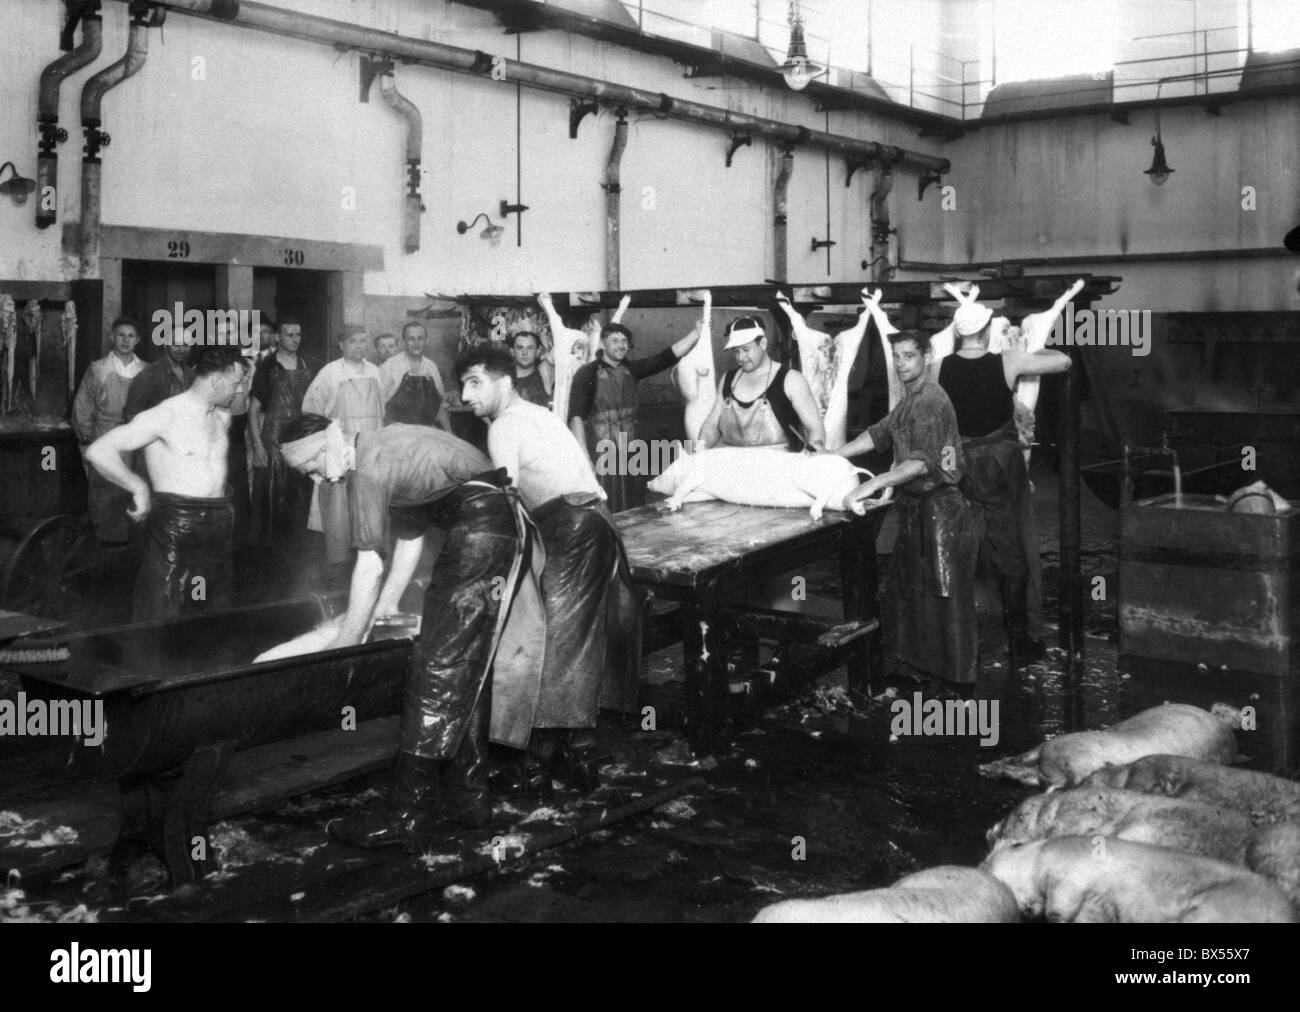 Prague 1935, vintage photograph of slaughter house at Holesovice. Stock Photo